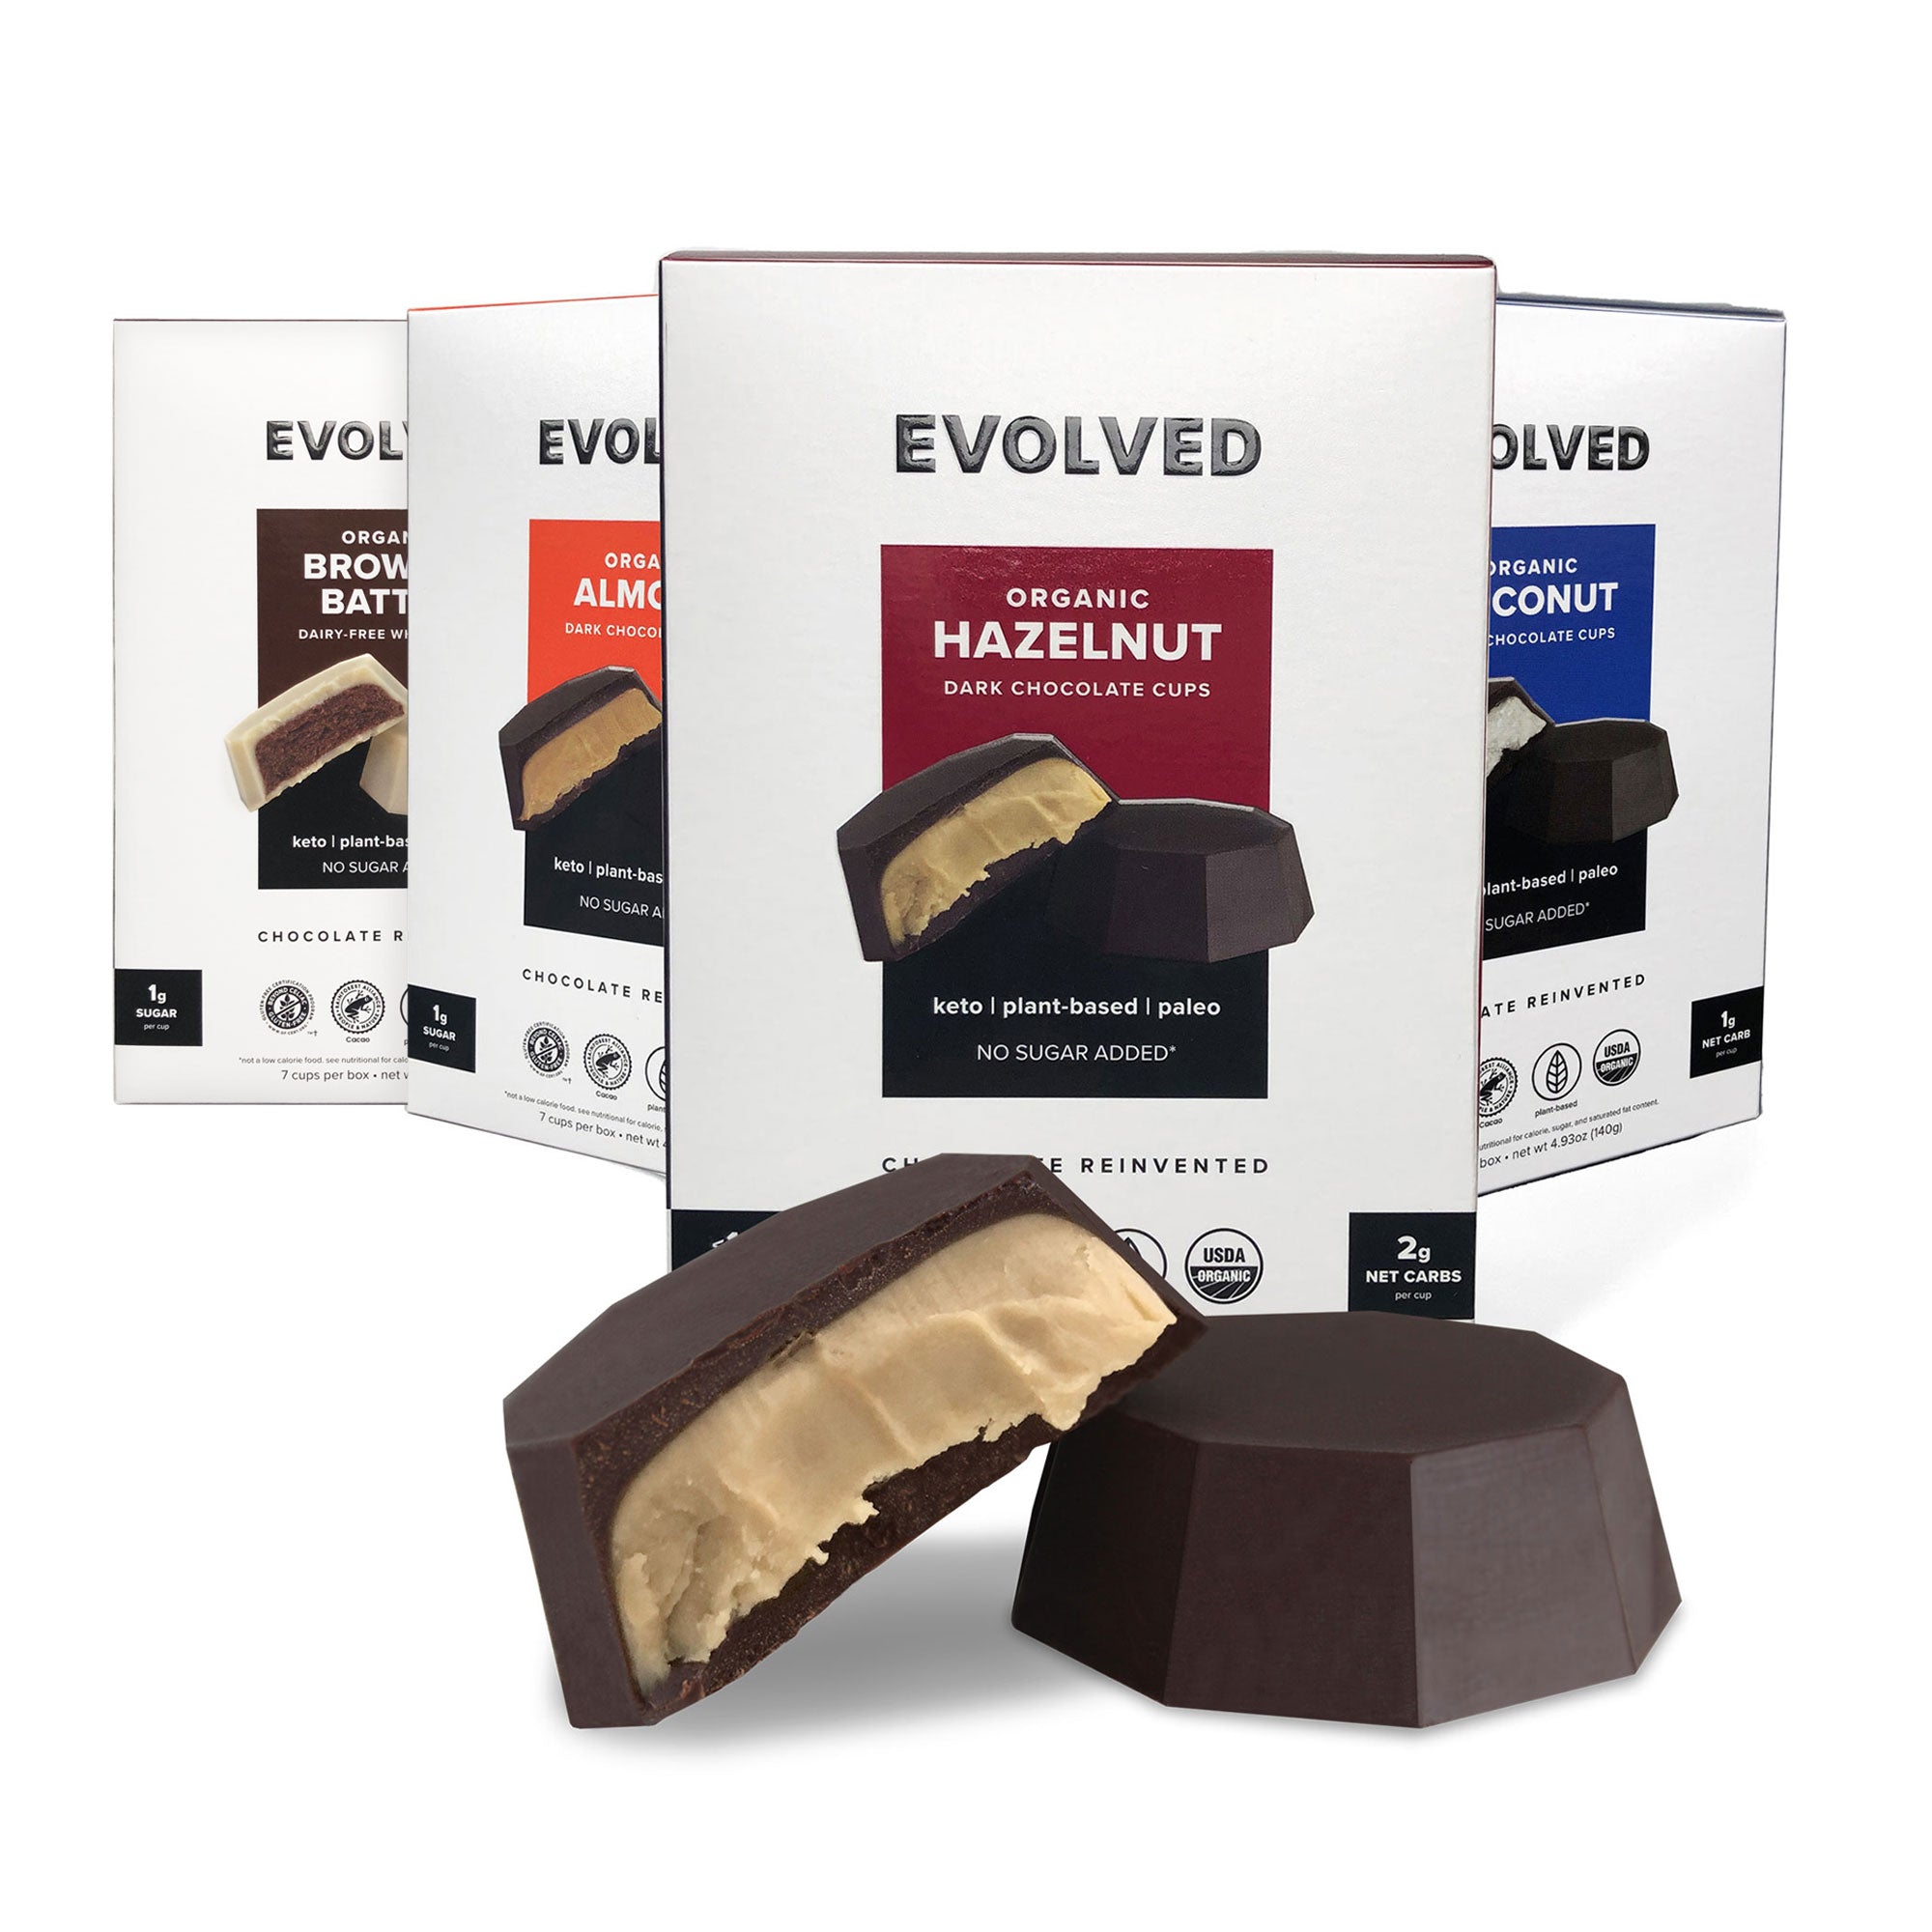 CHOCOLATE CUPS VARIETY PACK – EVOLVED CHOCOLATE